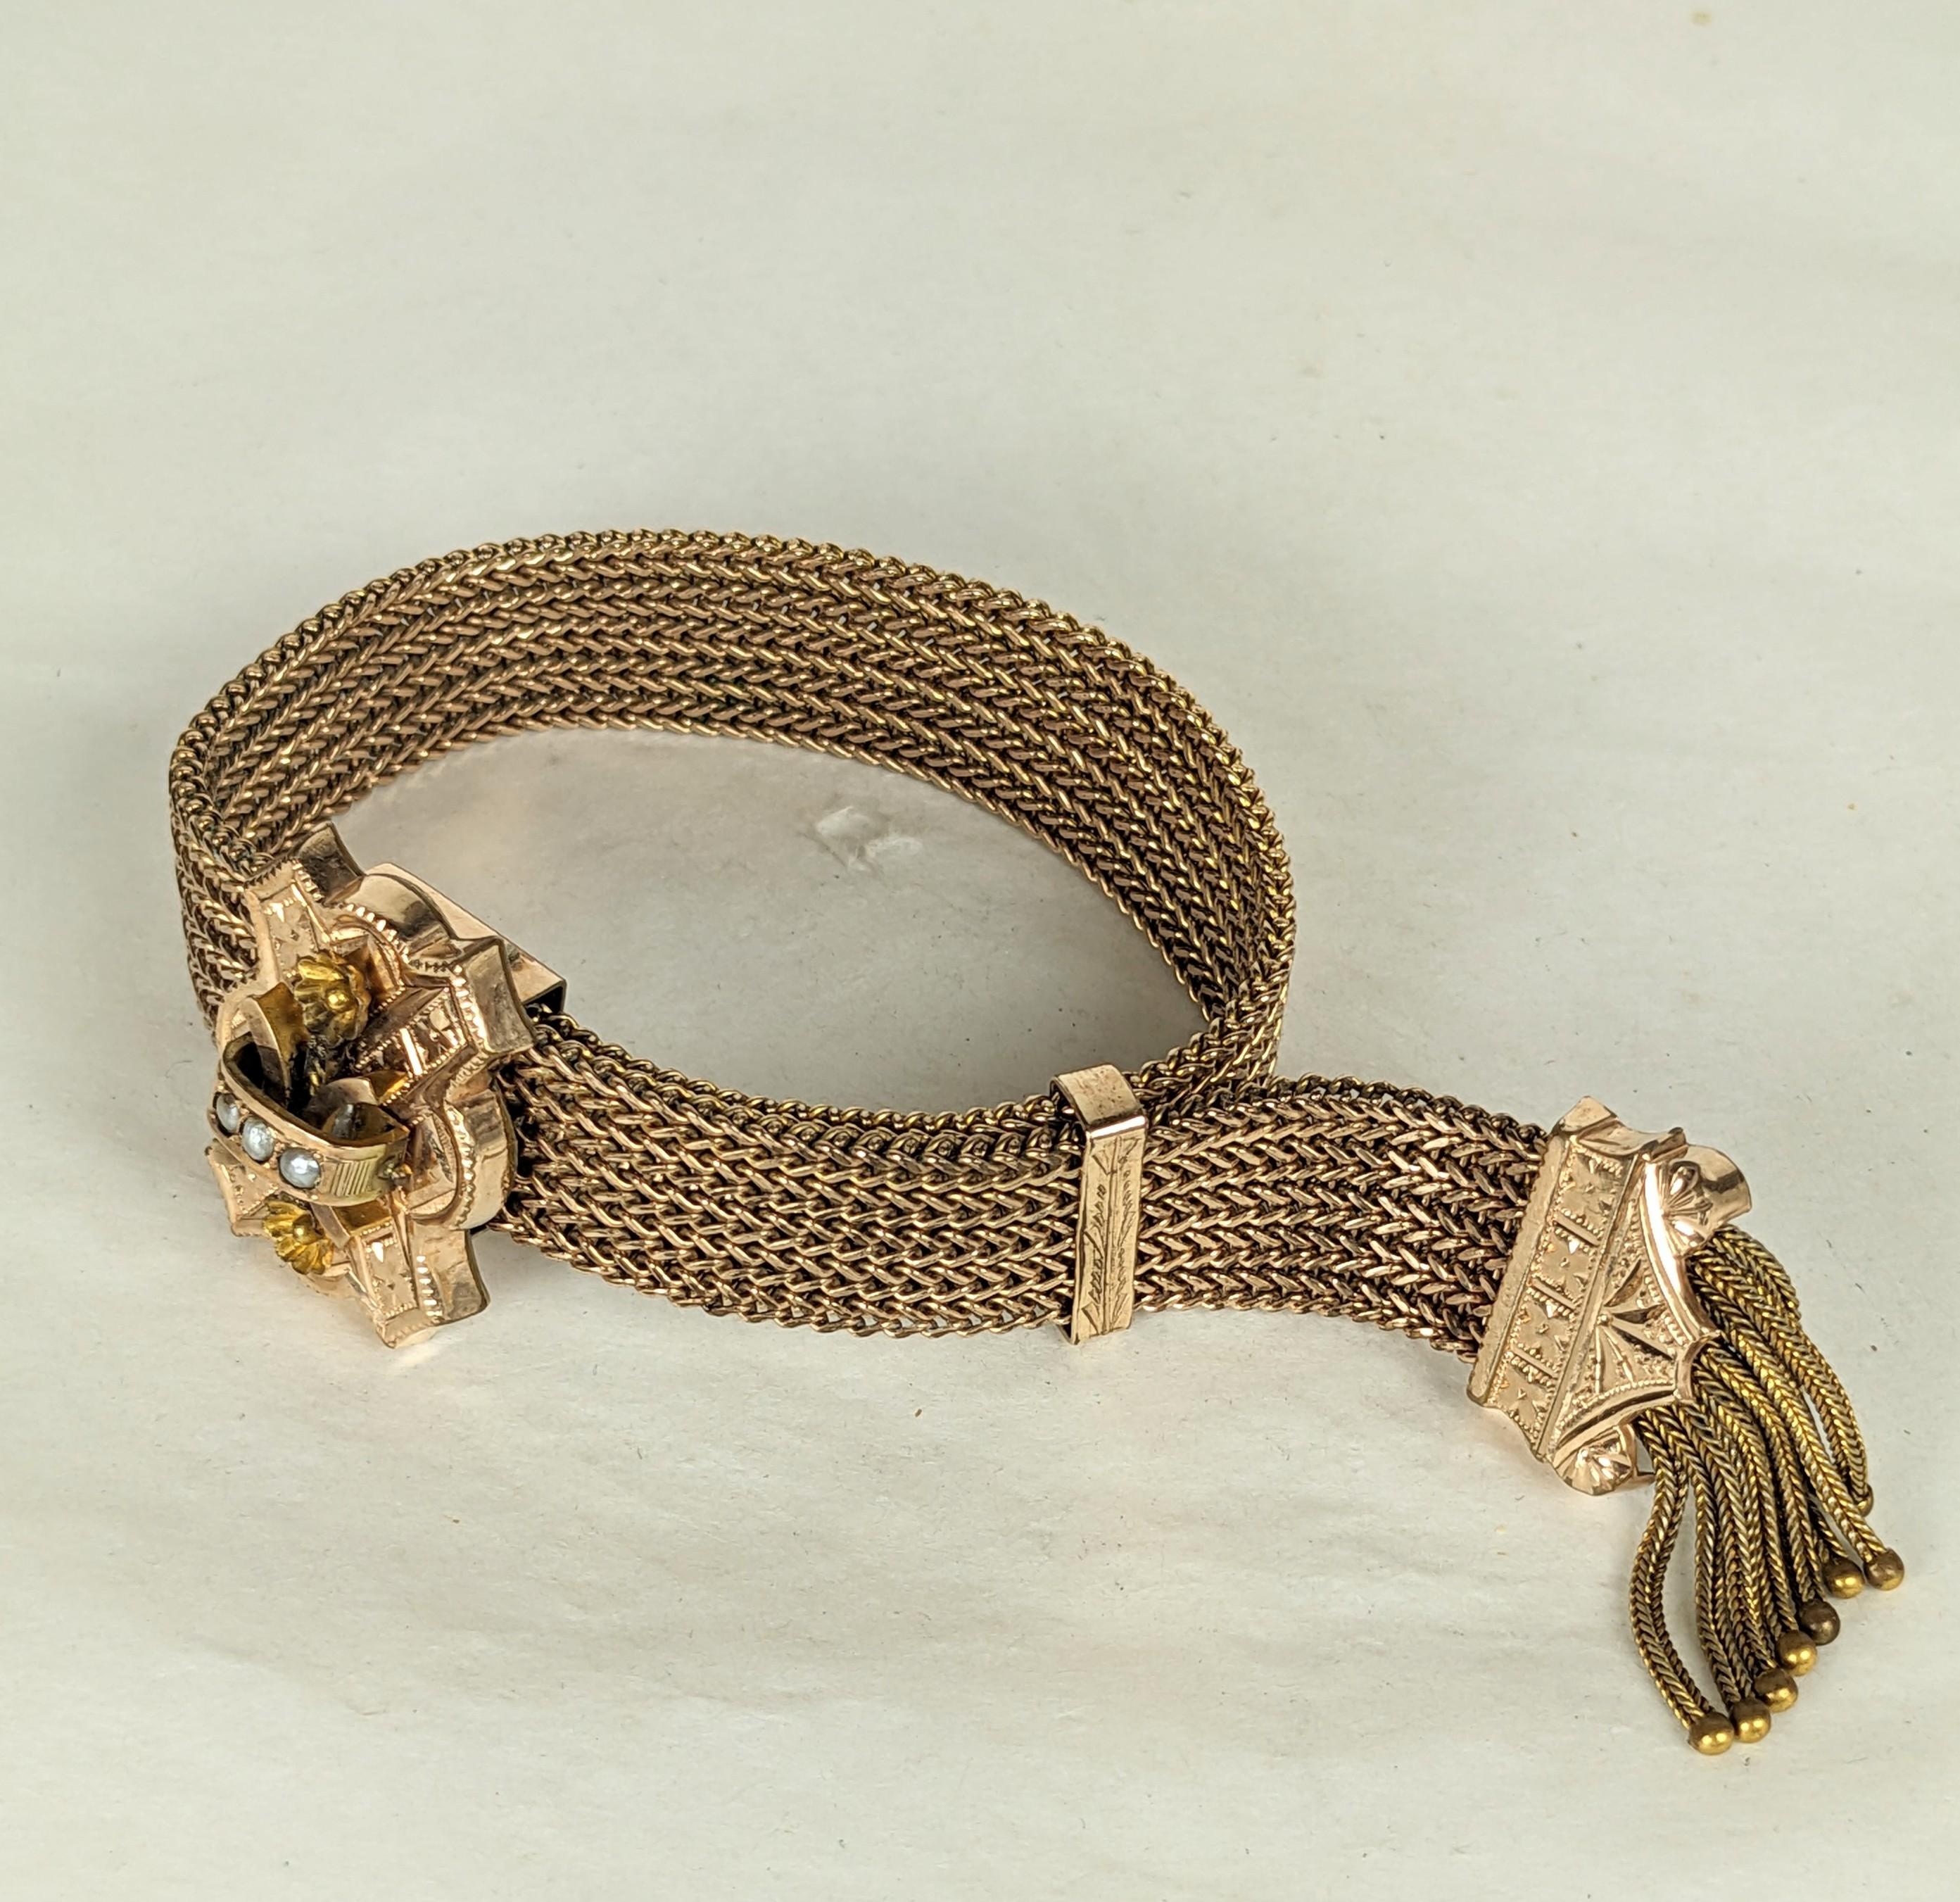 Victorian Gold Filled Slide Bracelet from the 1880's. Pinkish gold chain mesh bracelet with center adjustable slide set with natural pearls and flowers with fringed chain hilt. Bracelet expands and closes to fit any size wrist. Slide is 1